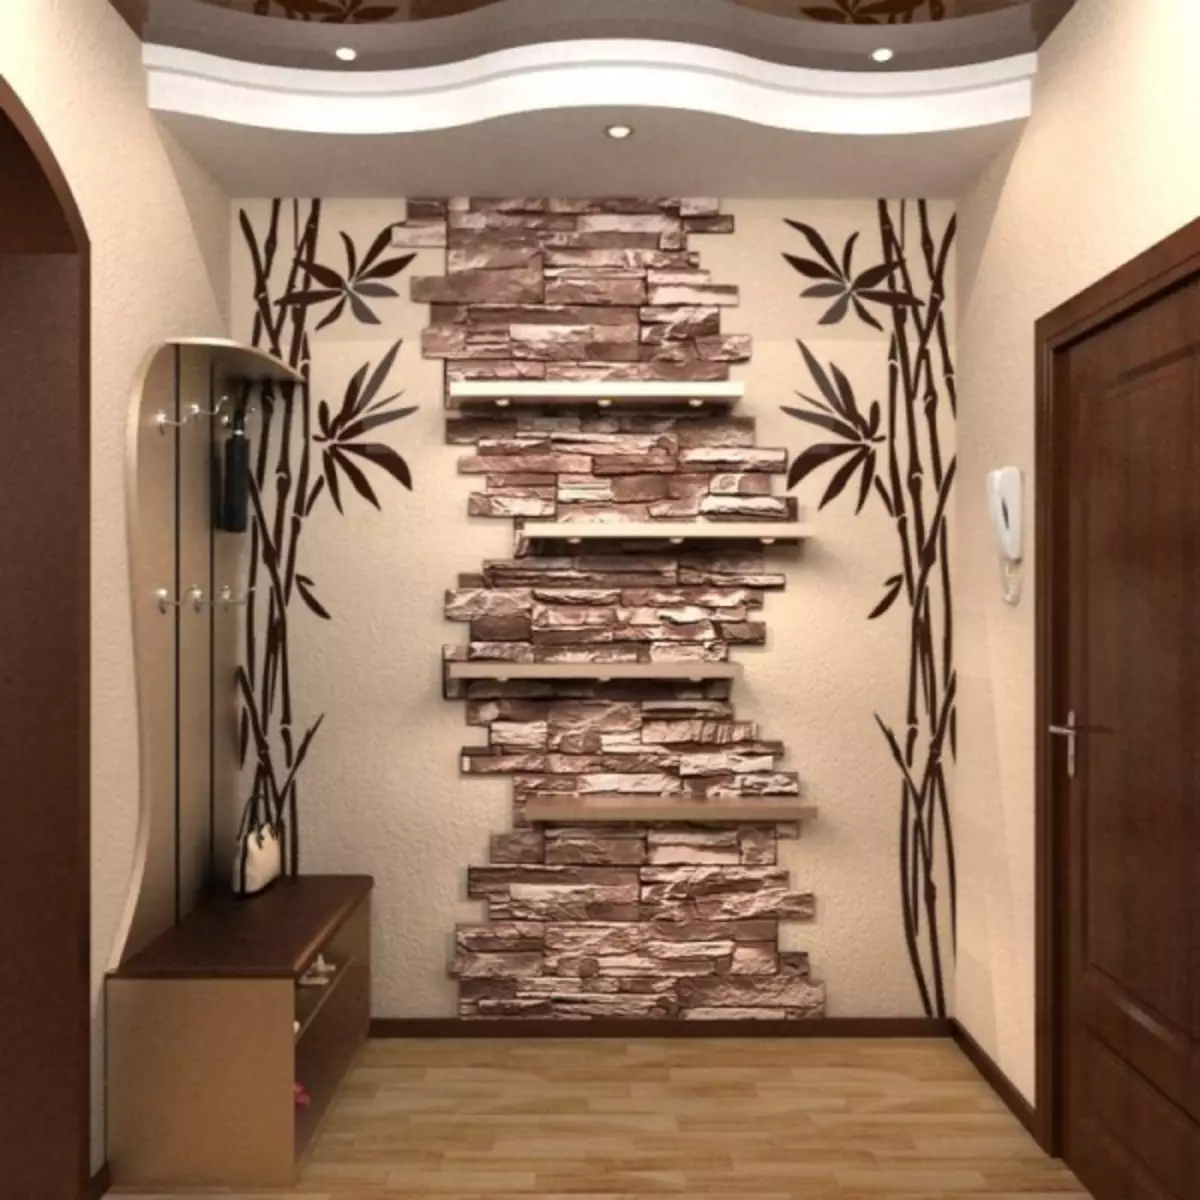 Finishing hallway with decorative stone and wallpaper photo: wallpaper for stone, bricks, video